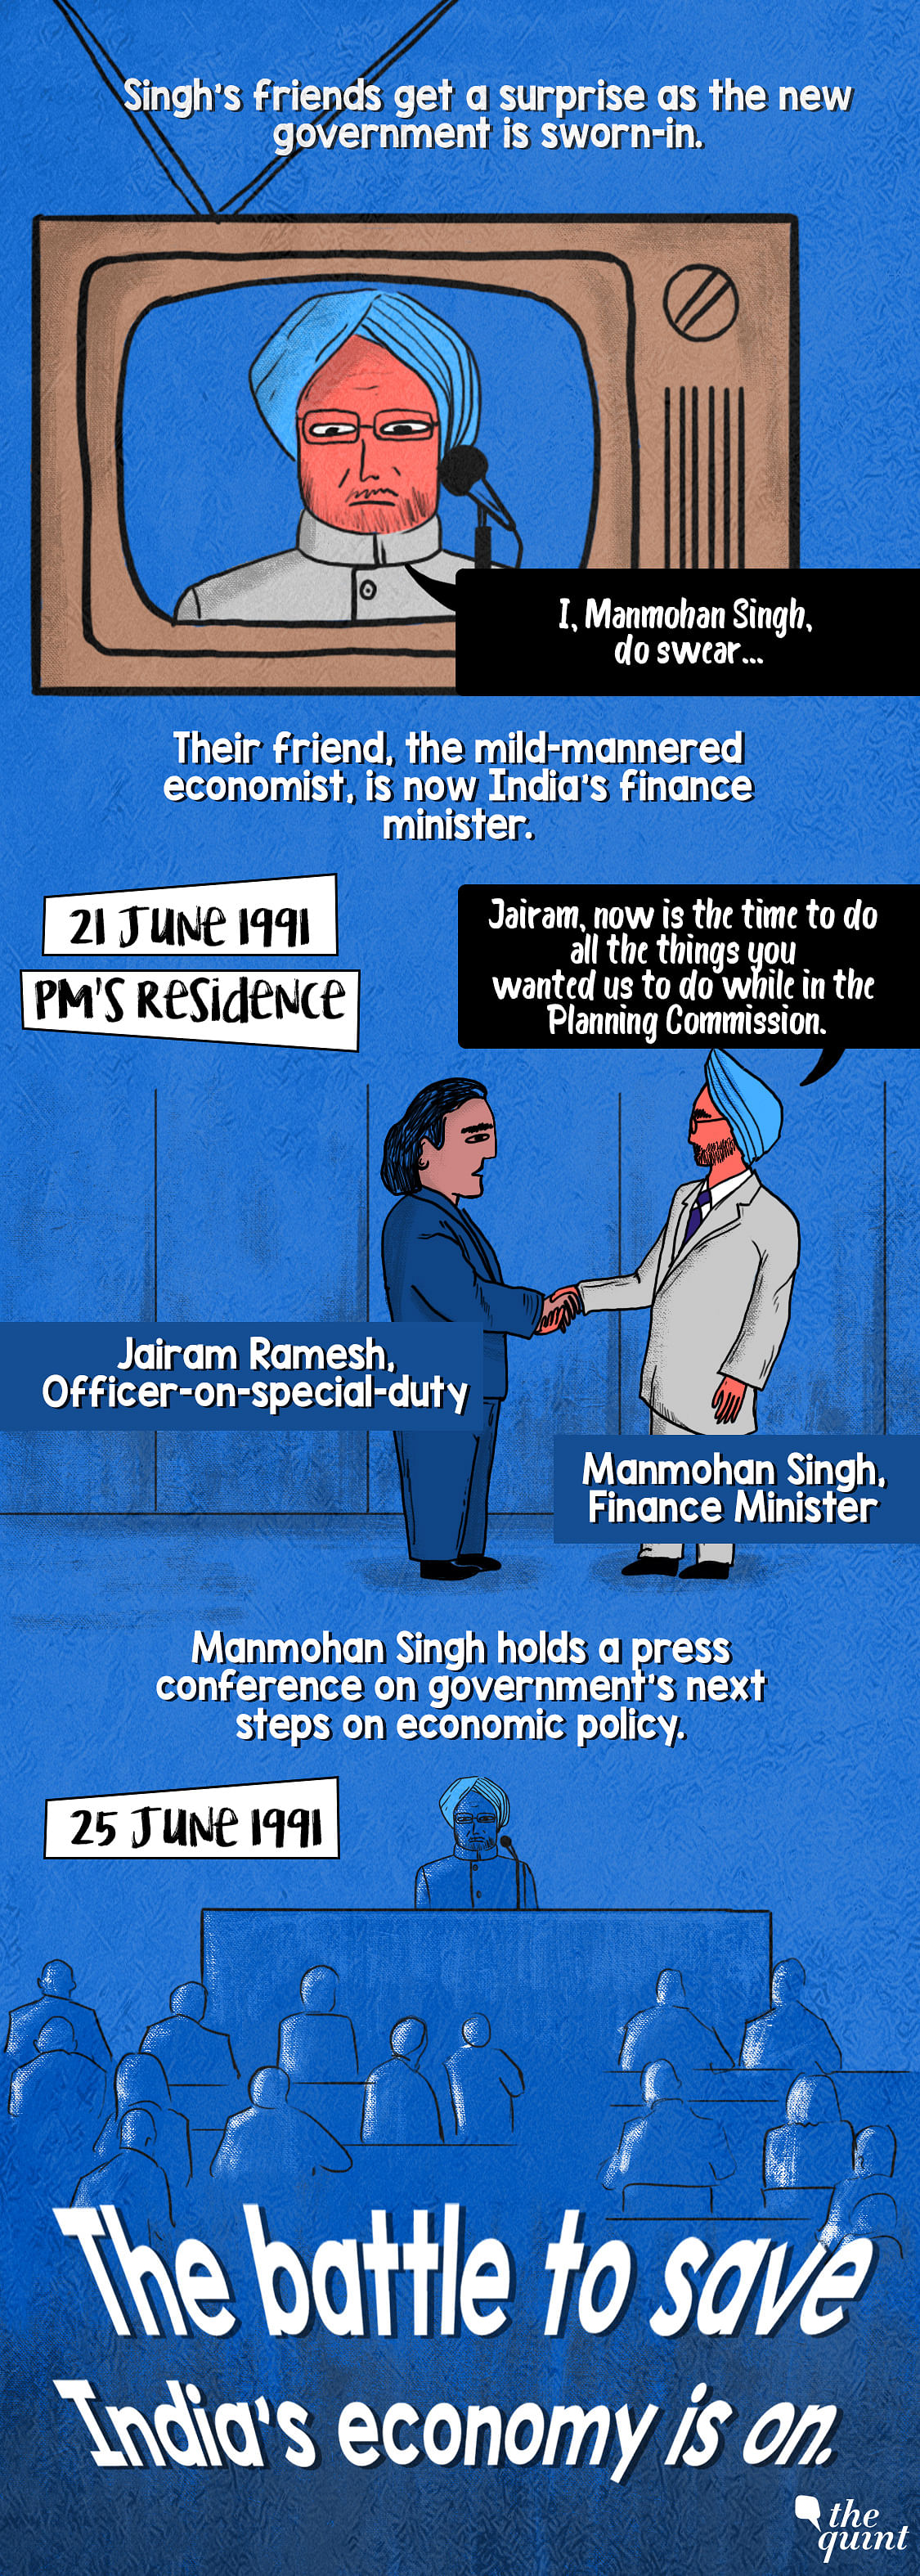 How did 1991 reforms, led by the then Finance Minister Manmohan Singh under Prime Minister Narasimha Rao, unfold?